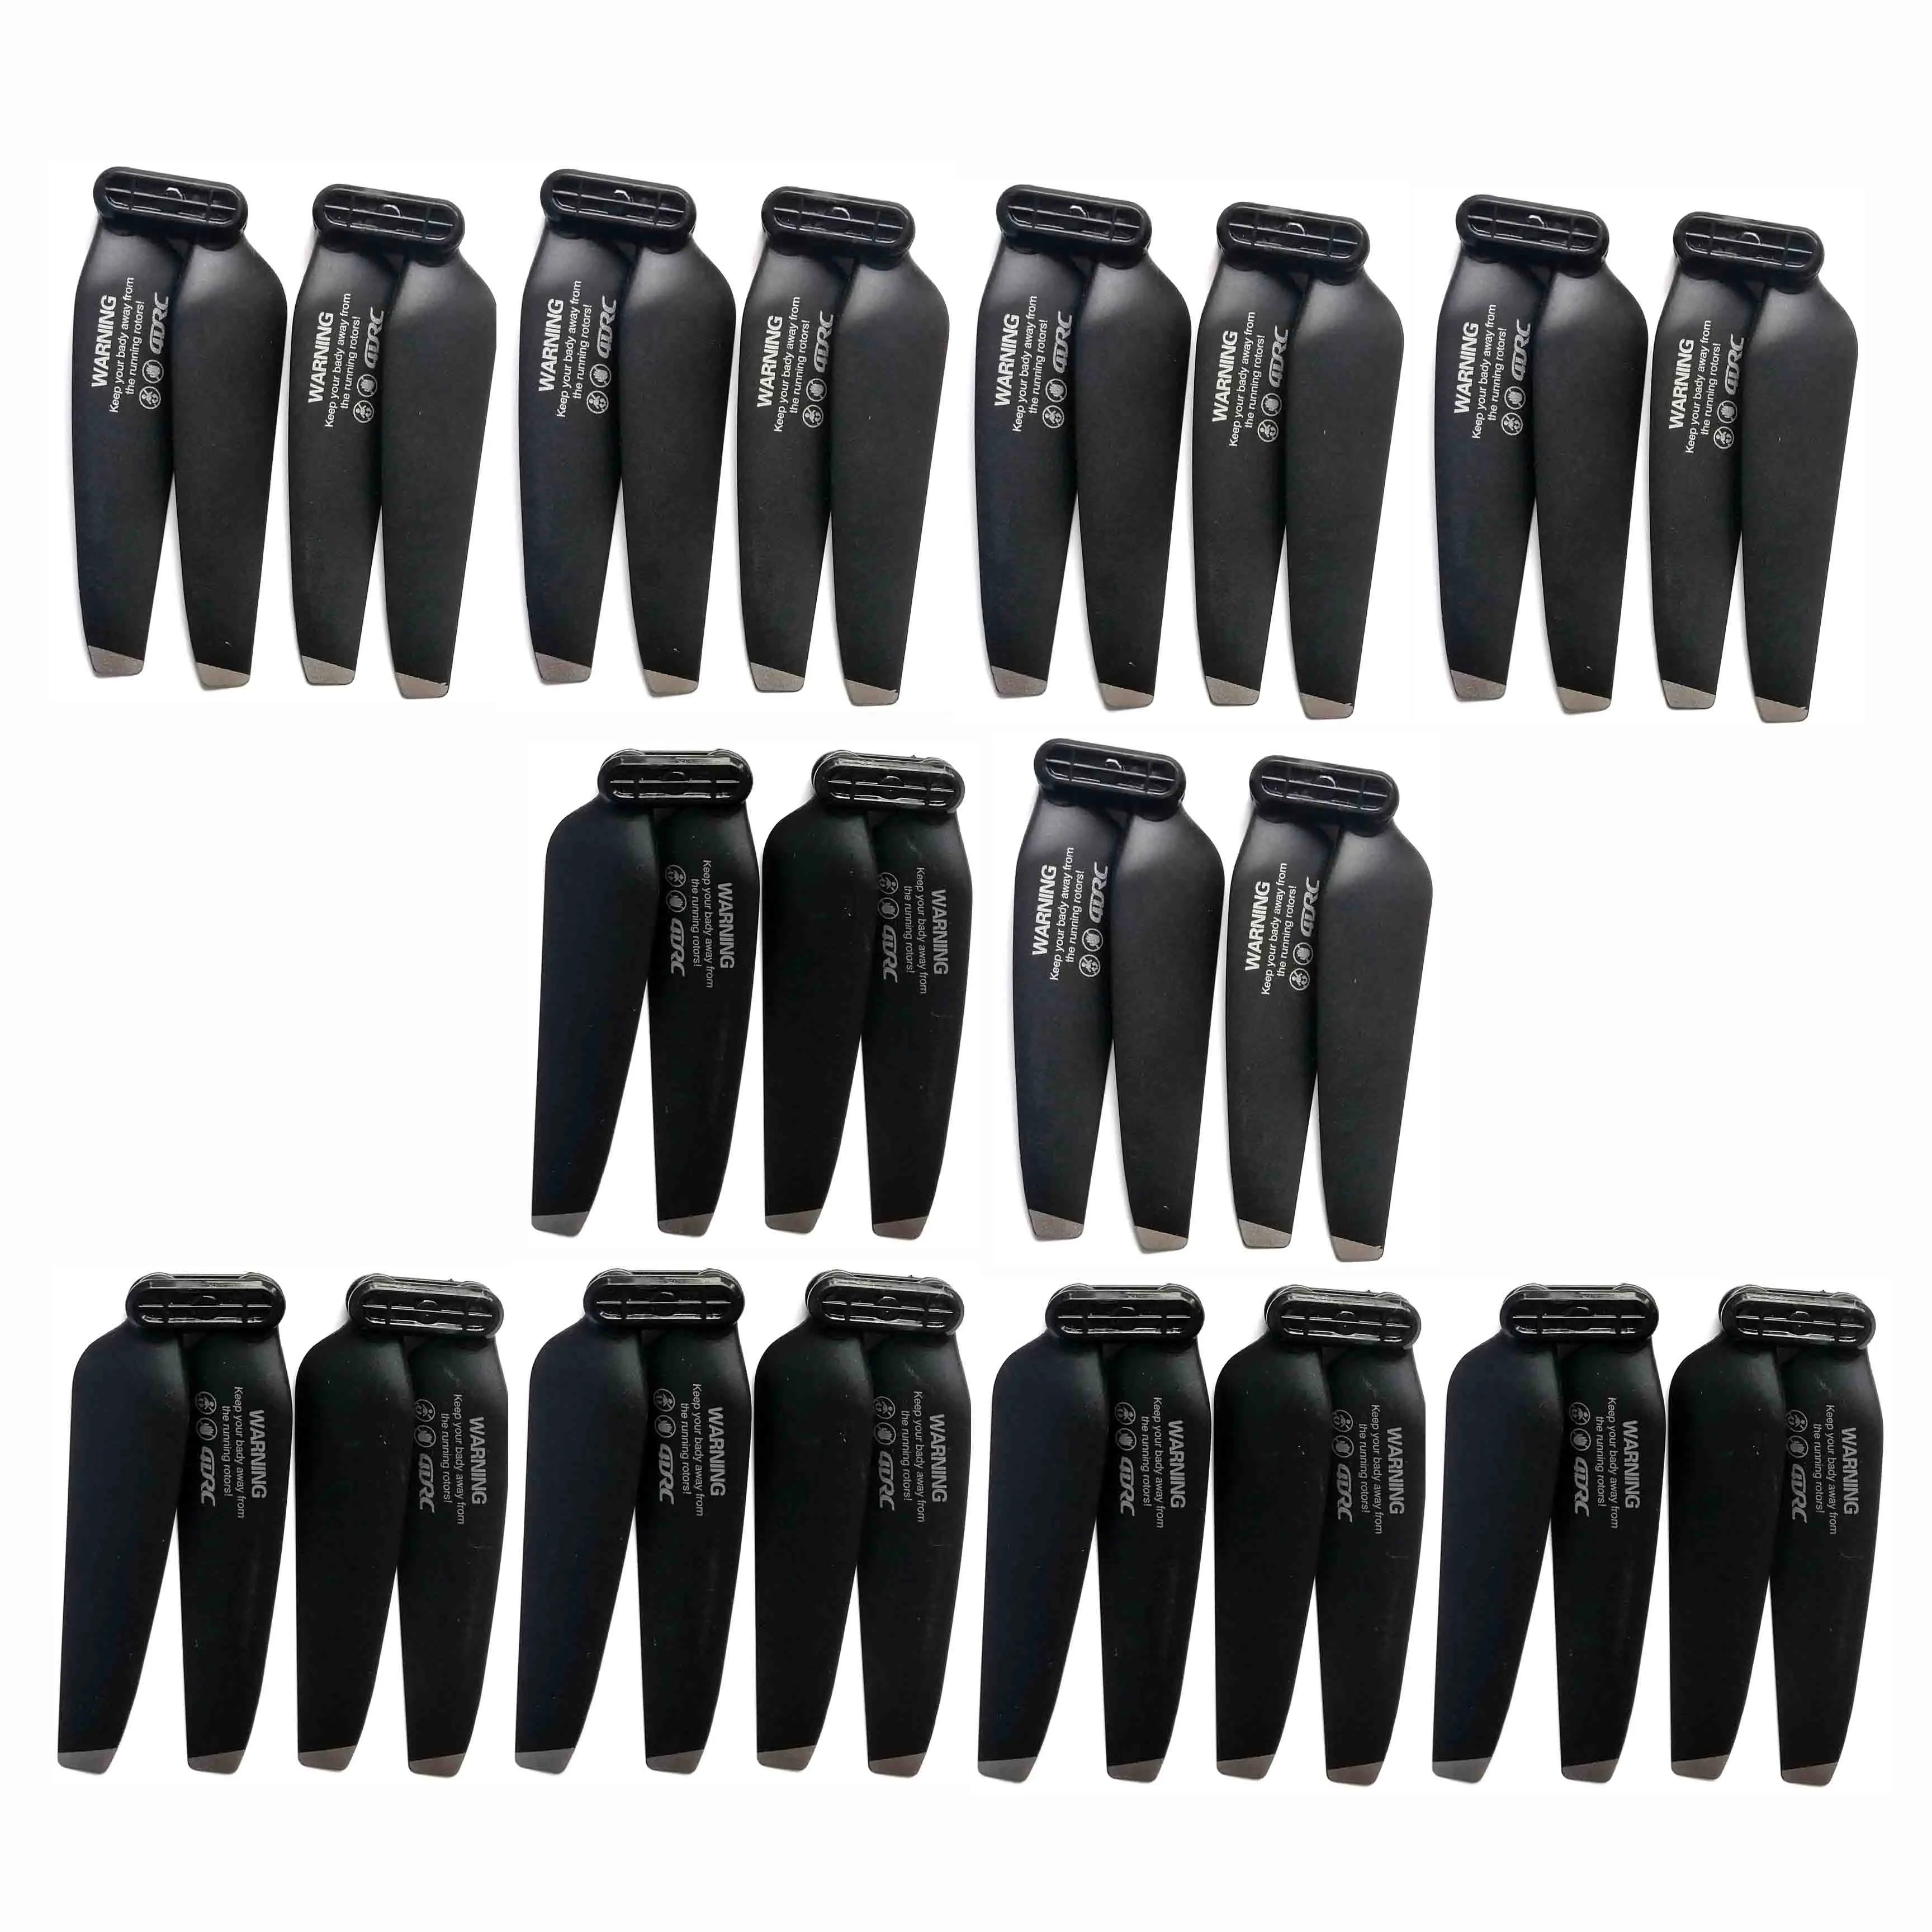 

5 Sets/ 20PCS New Drone 4DRC F3 GPS F3 Drone 4K 2.4G/5G WiFi FPV RC Quadrotor Helicopter Spare Parts CW CCW Propeller AB Blade